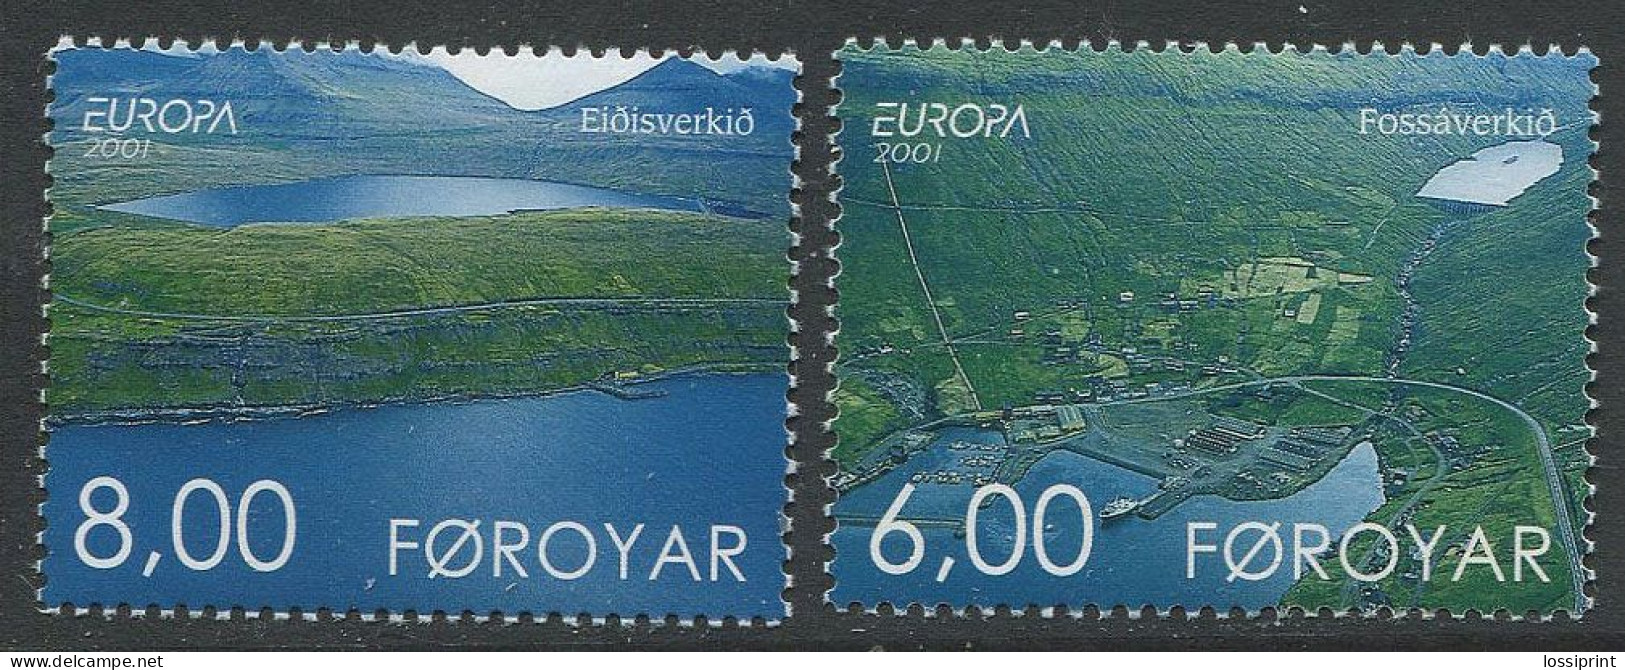 Foroyar:Unused Stamps EUROPA Cept, 2001, MNH - 2001